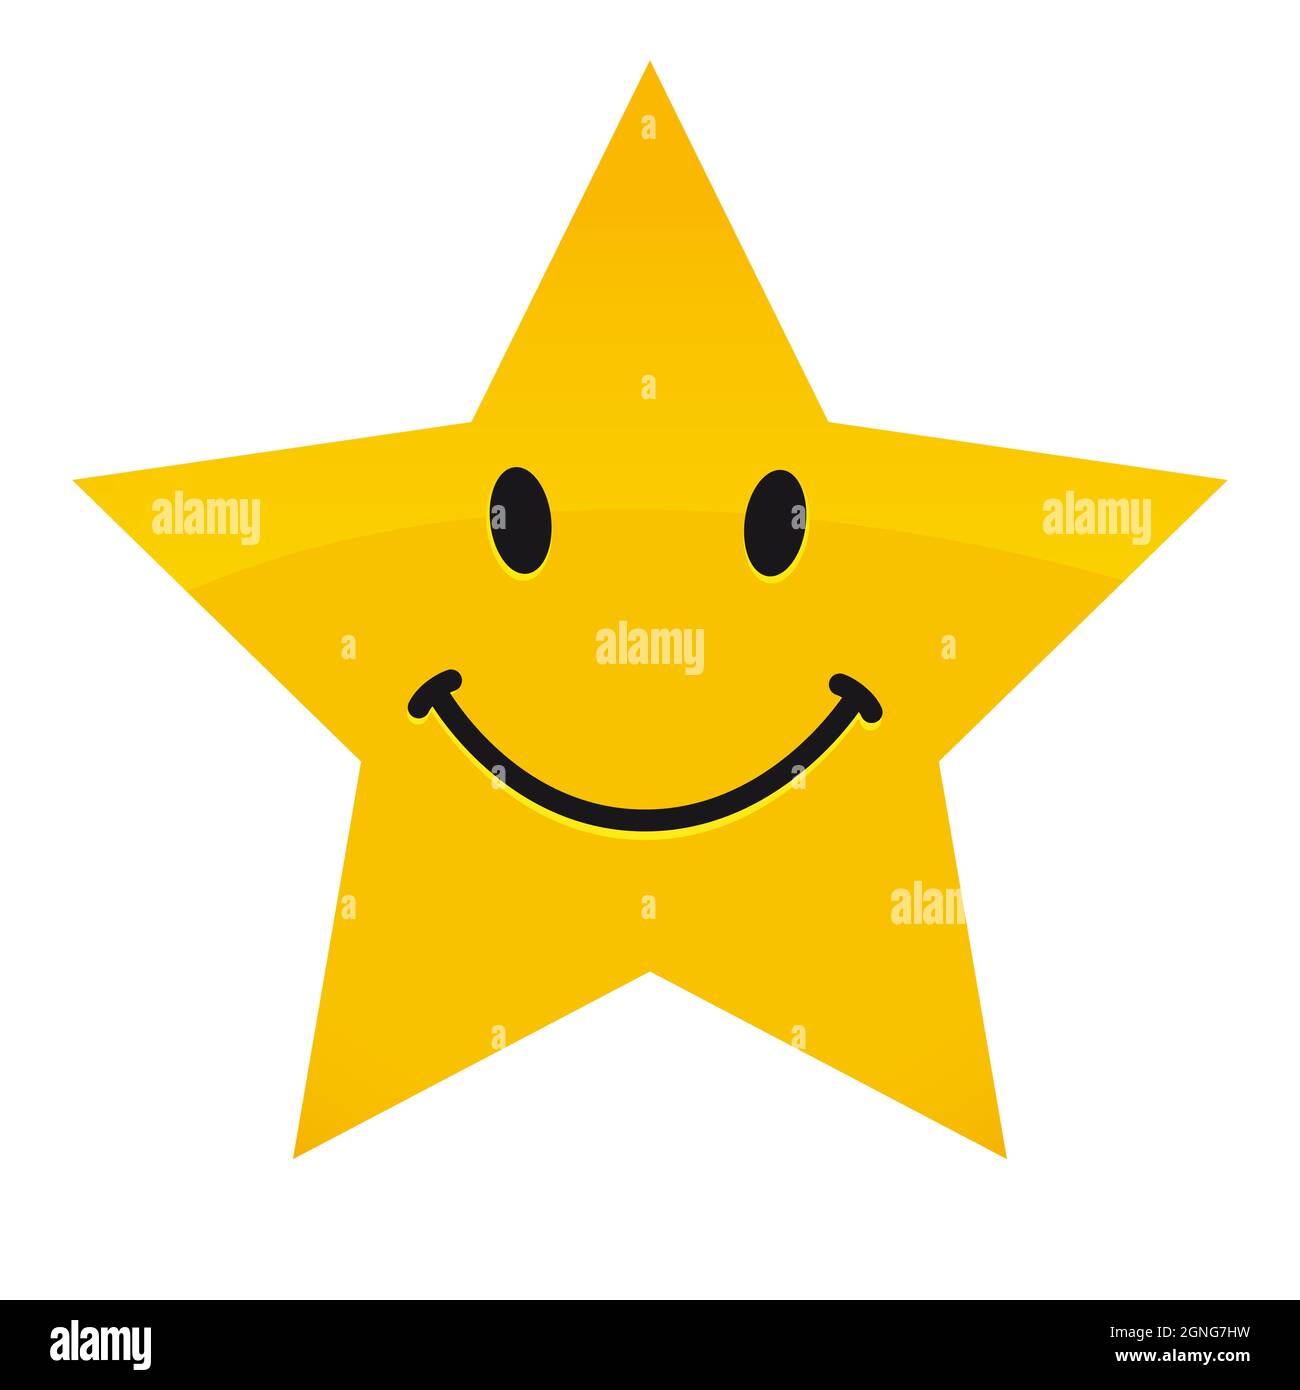 Creative smile icon, holiday star shape. Smiling emoticon vector logo. Happy World Smile Day, Happy Emoji Day congrats. Isolated abstract graphic desi Stock Vector